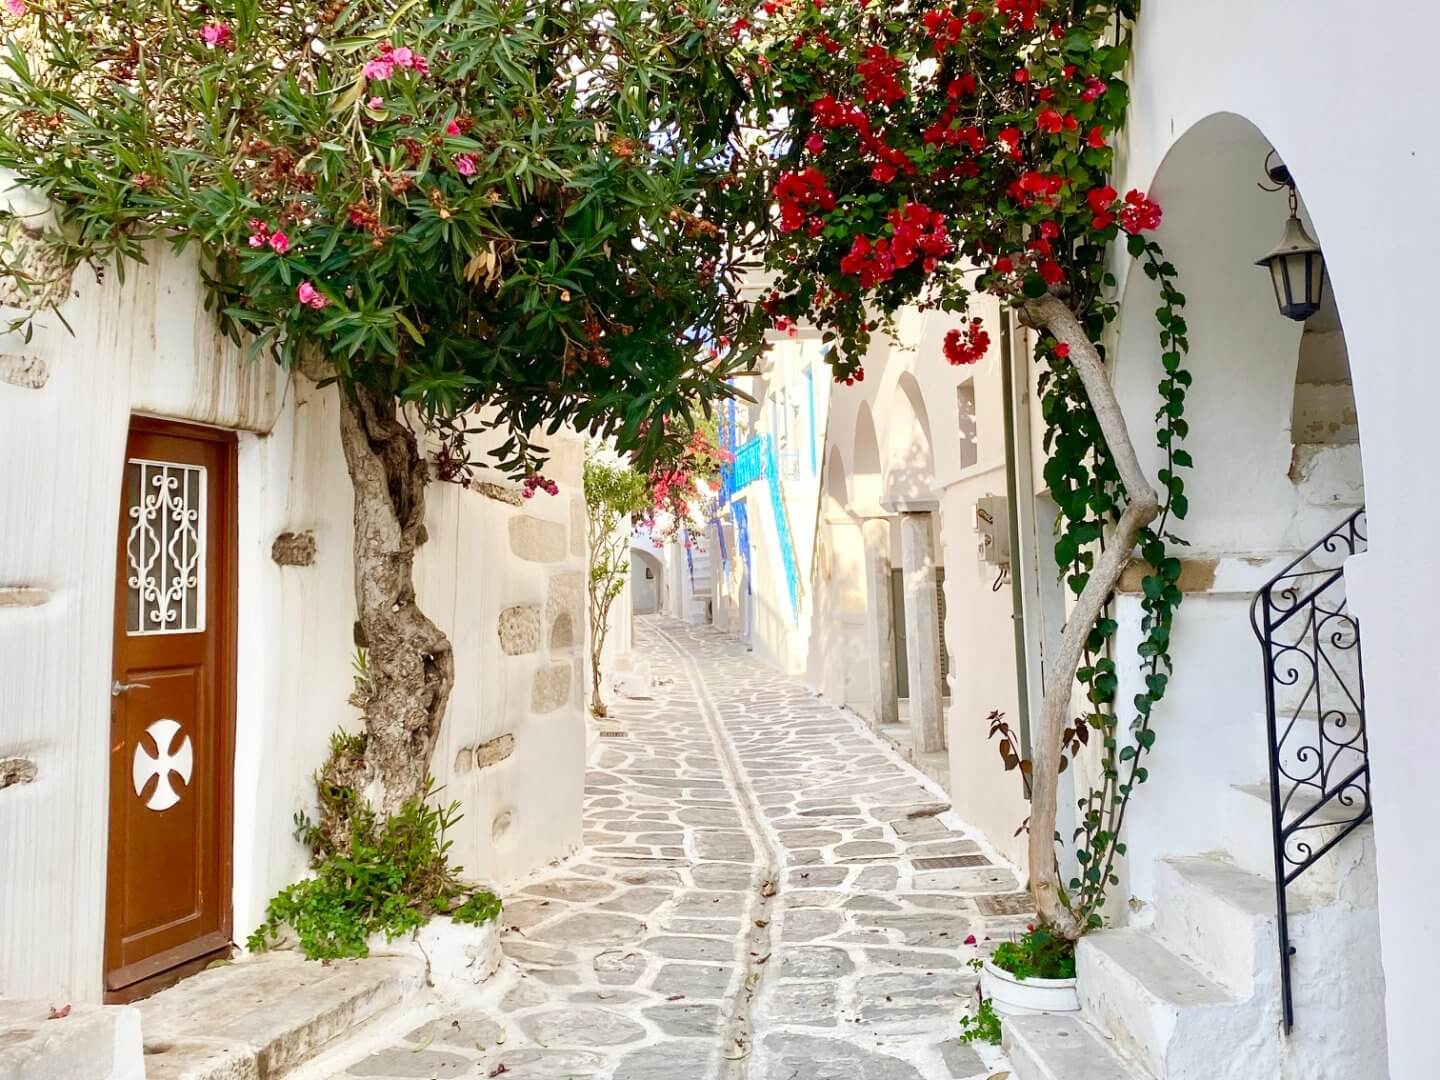 Narrow whitewashed village street with a church door and pin kand red bougainvillea